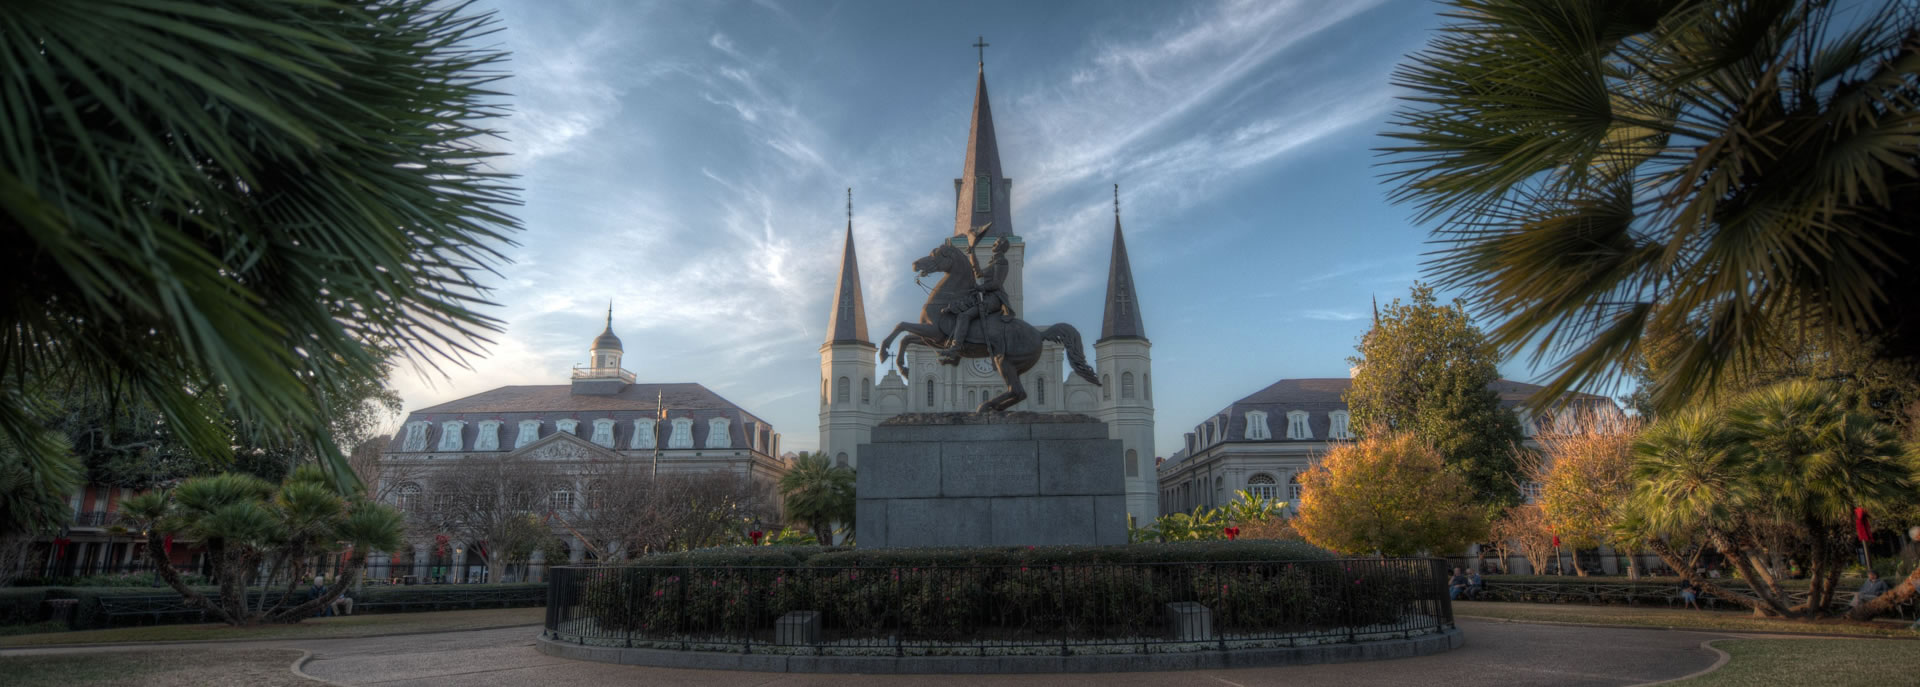 Jackson Square, one of the most historically significant sites in New Orleans.